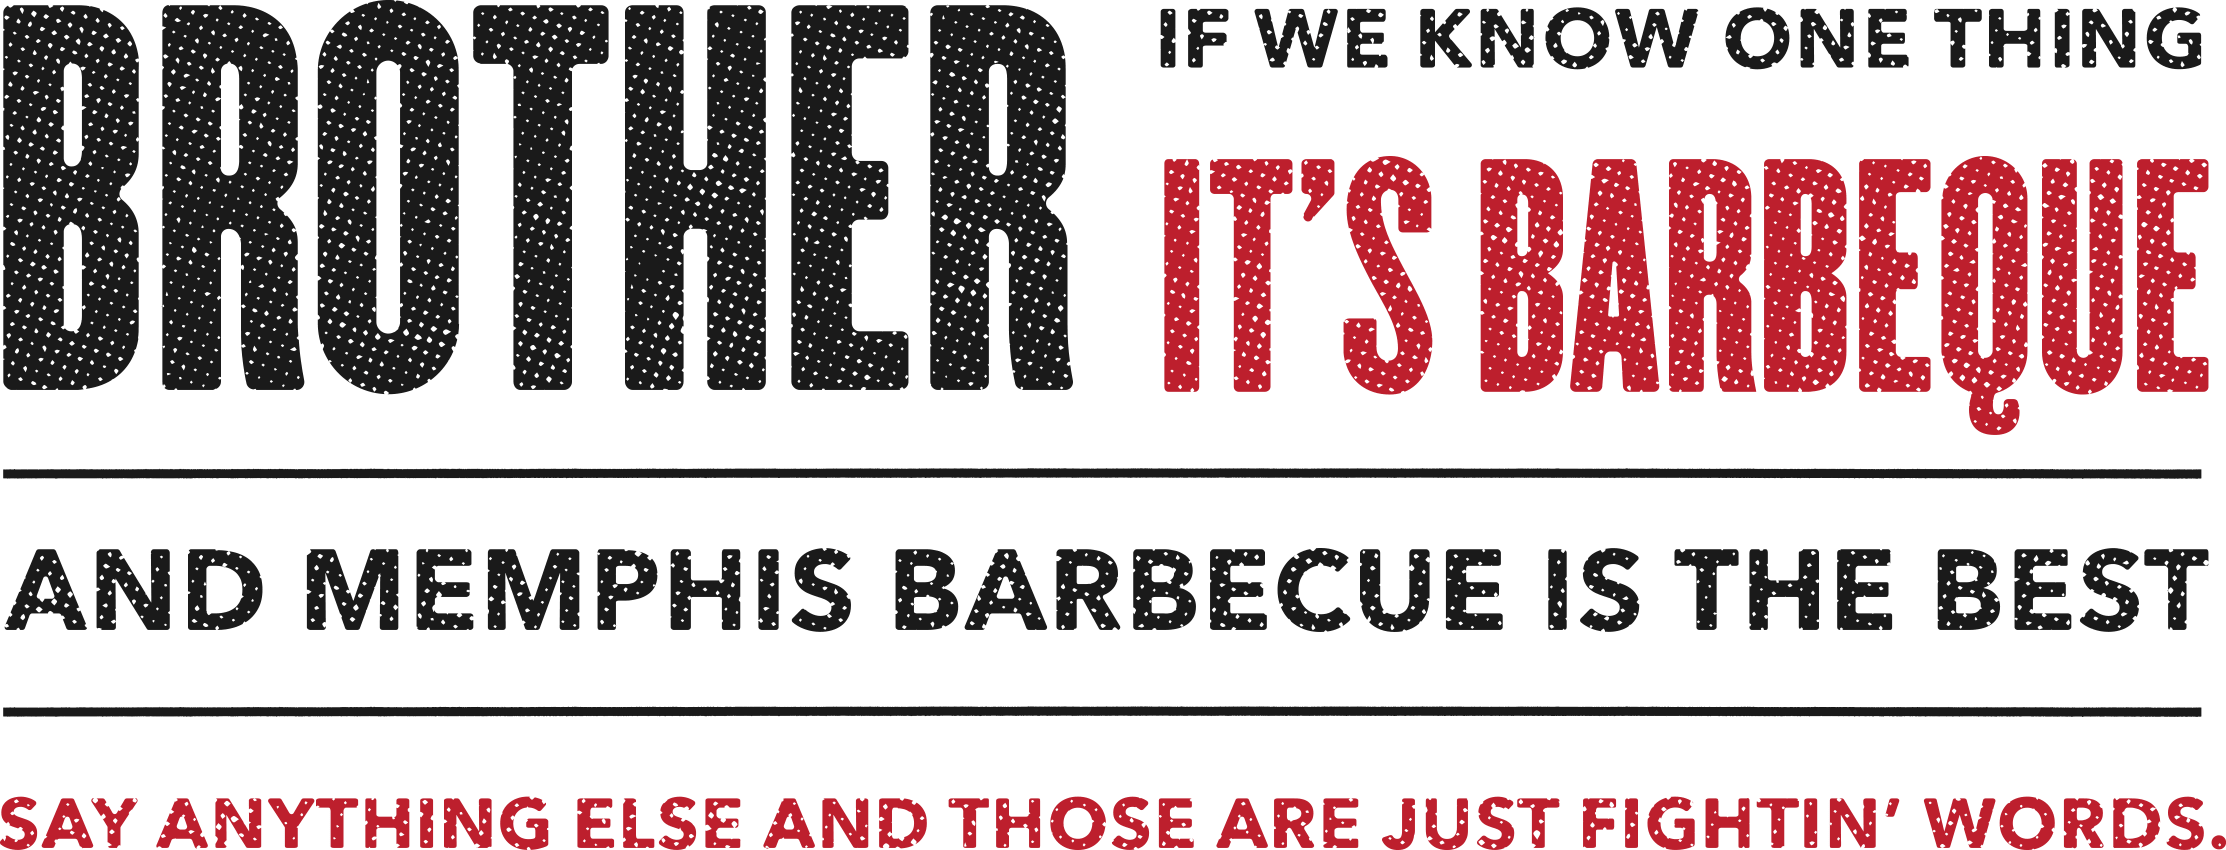 Brother, if we know one thing it's barbecue. And Memphis barbecue is the best. Say anything else and those are just fightin' words.